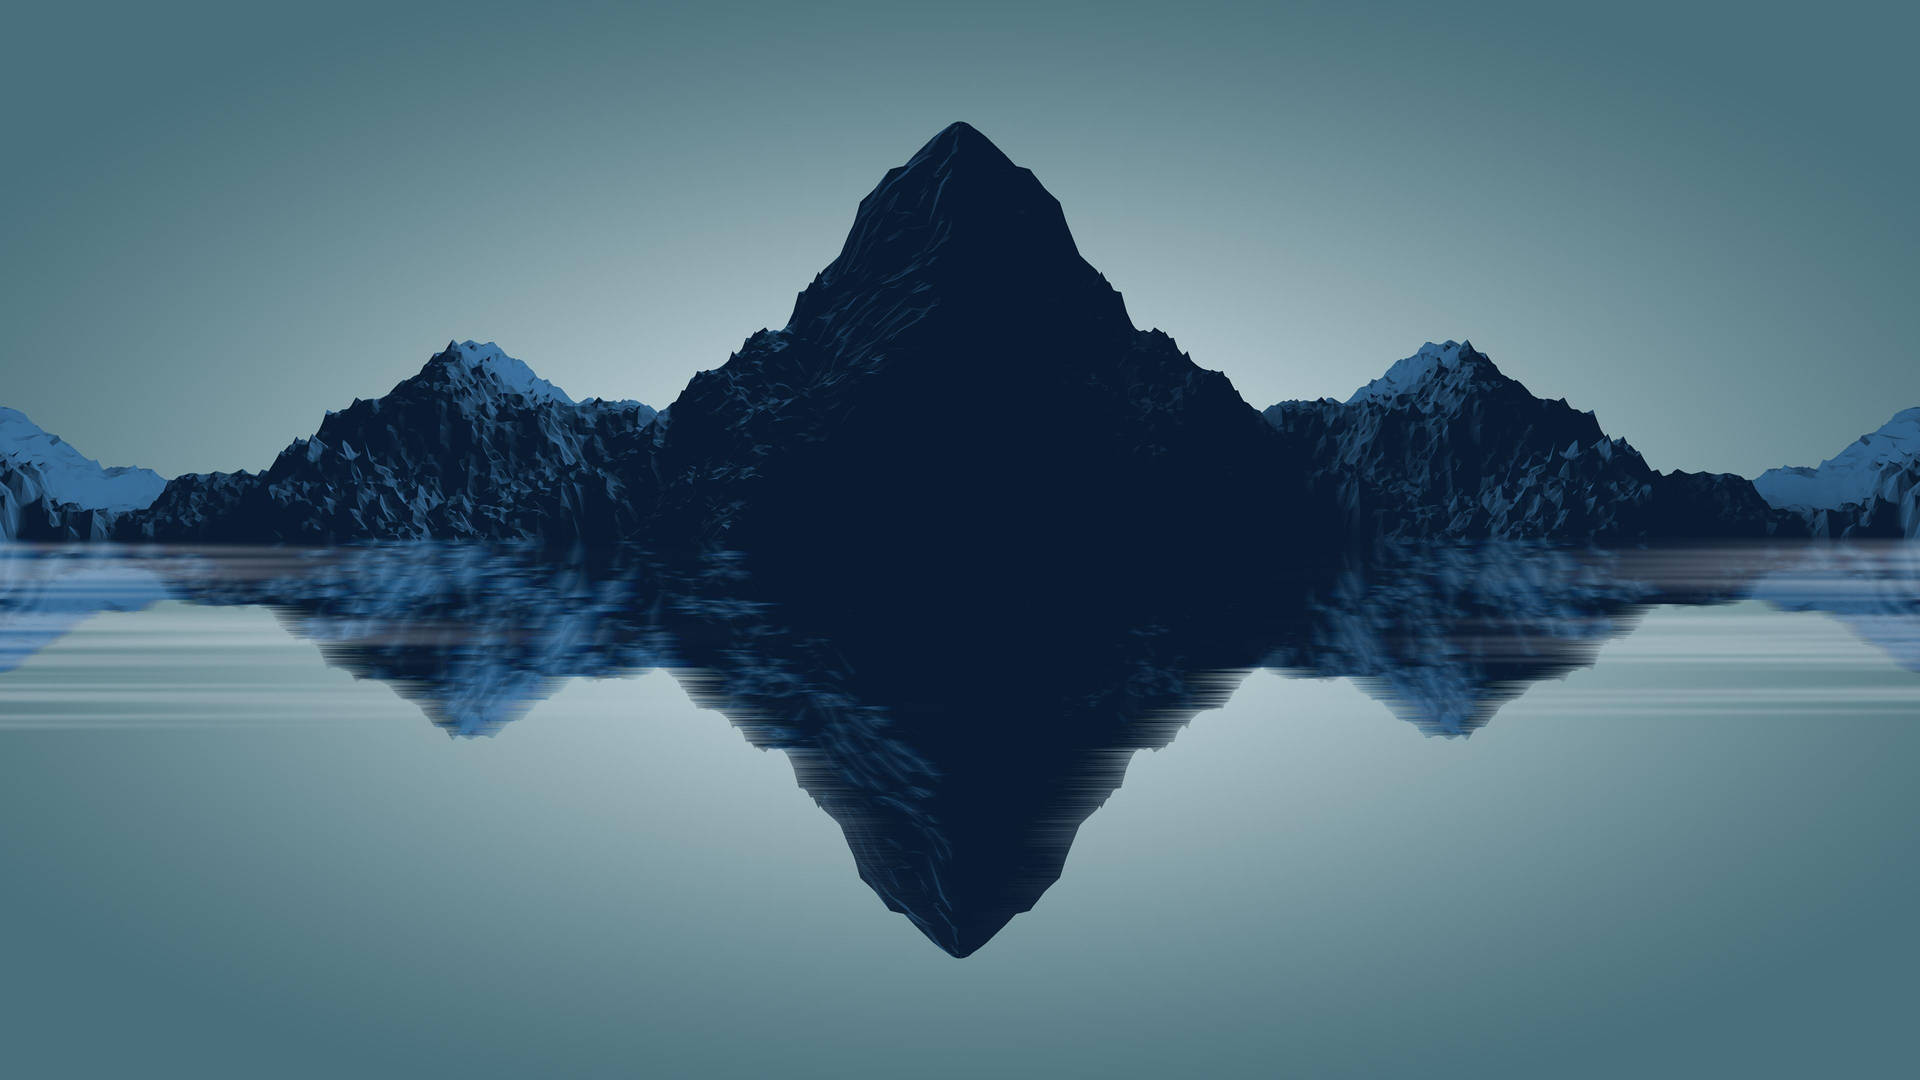 Minimalist Nature With Mountains Over A Lake3 Wallpaper